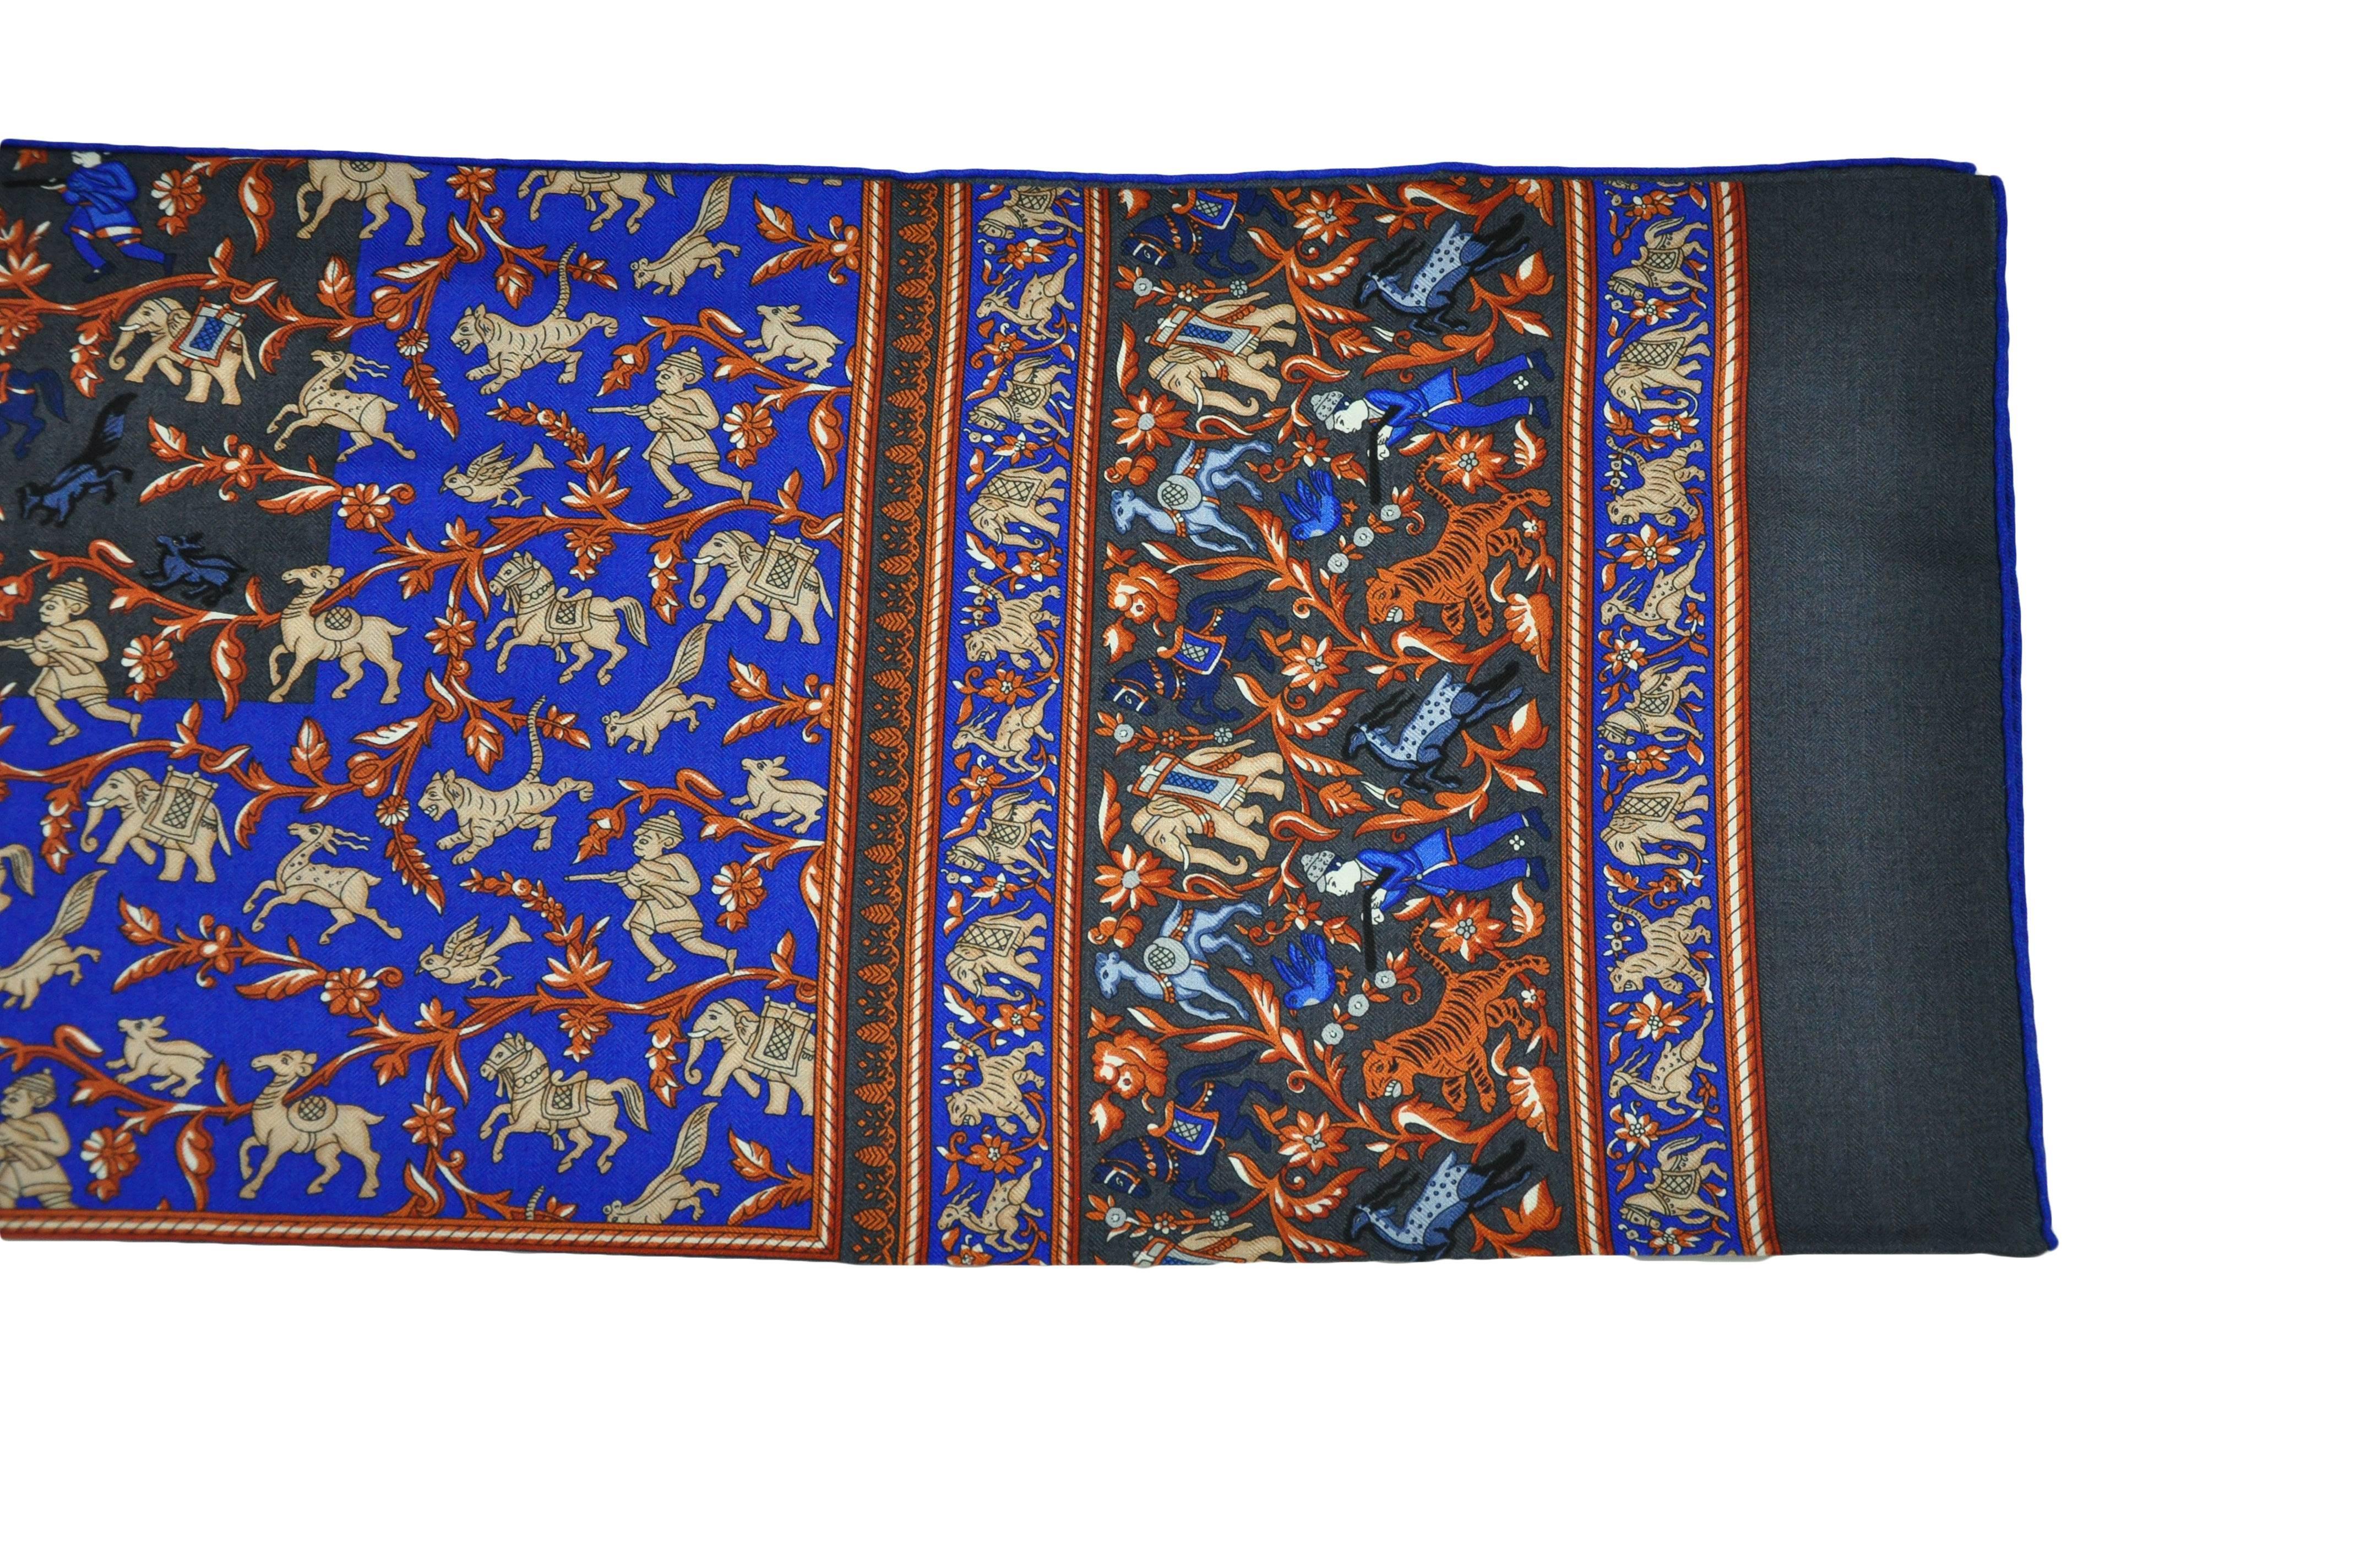 This Hermes 140 cm x 140 cm cashmere & silk shawl is beautifully printed with multiple animals and hunters from 2016 collection. A colorful combination in grey/electric blue/brown  Brand new in a Hermes gift box.